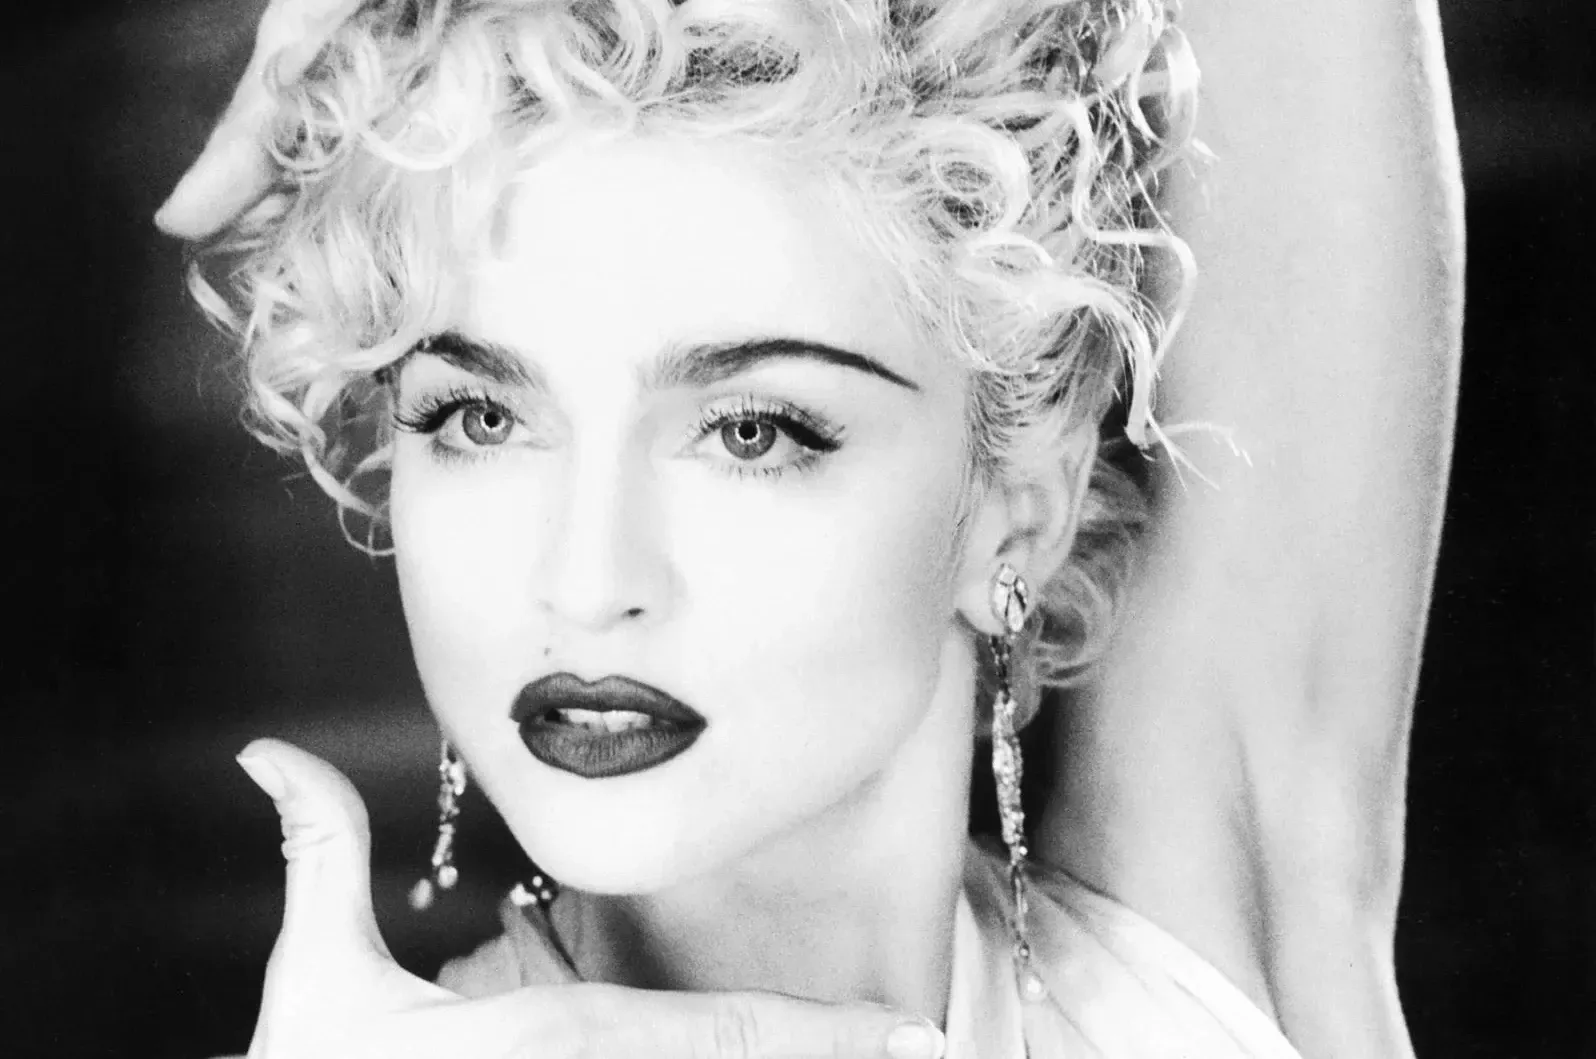 RIAA: Madonna’s ‘Vogue’ Becomes Her Highest-Certified Single Ever With New 3x Platinum Status Over 30 Years After Release